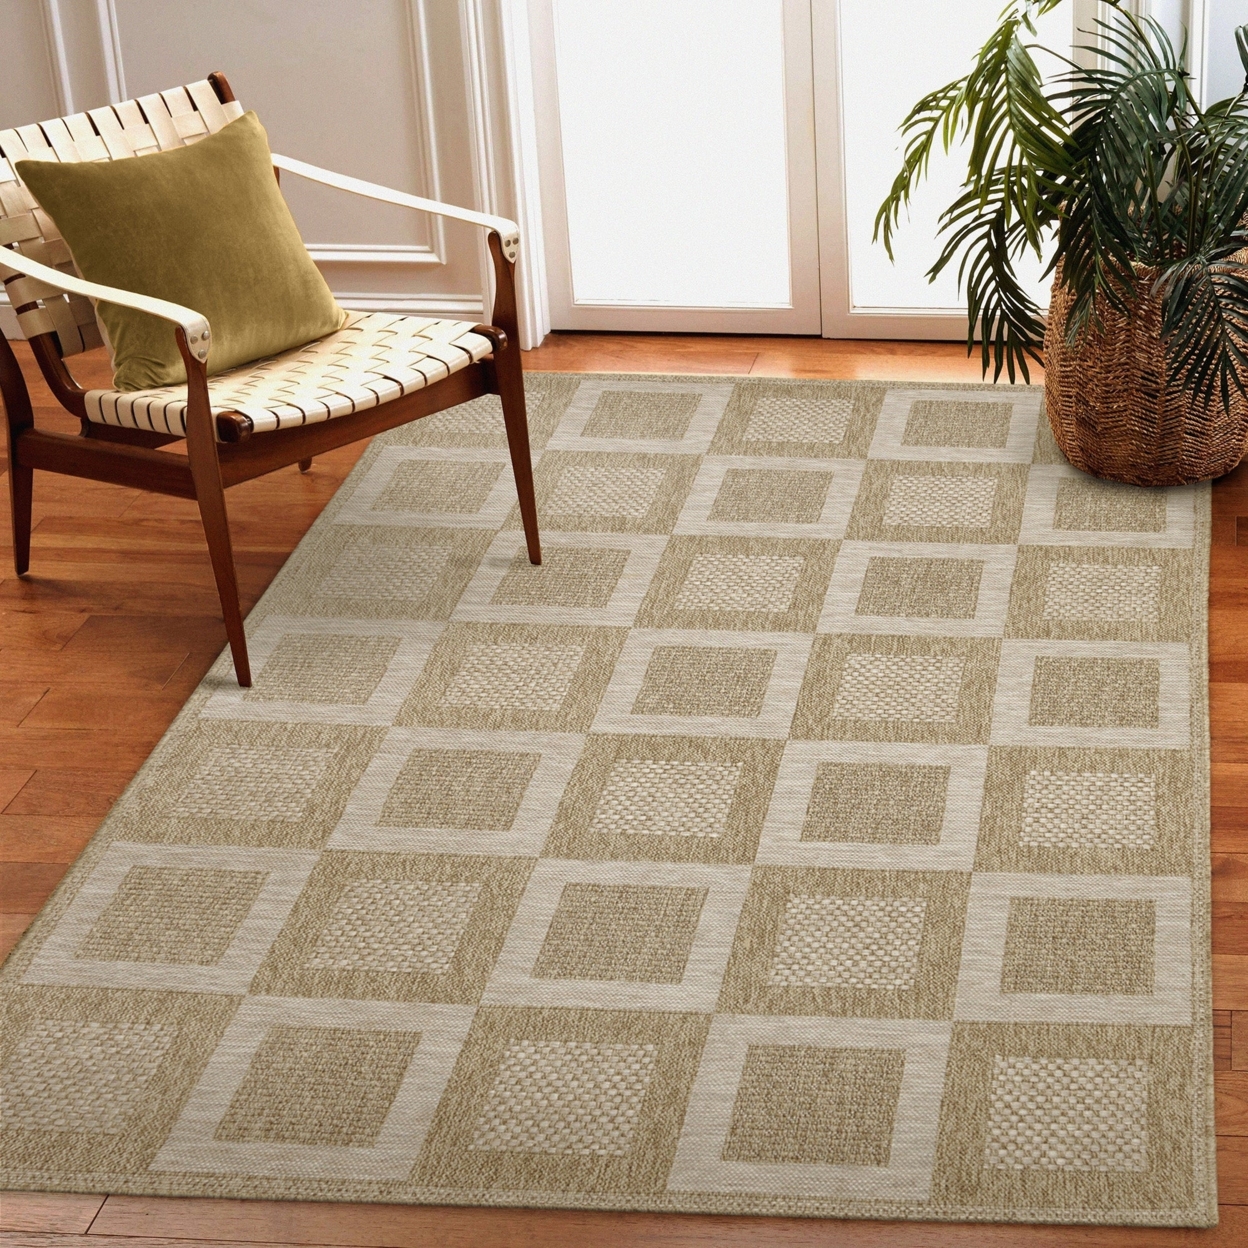 Liora Manne Orly Squares Indoor Outdoor Area Rug Natural - 5'3 X 7'3